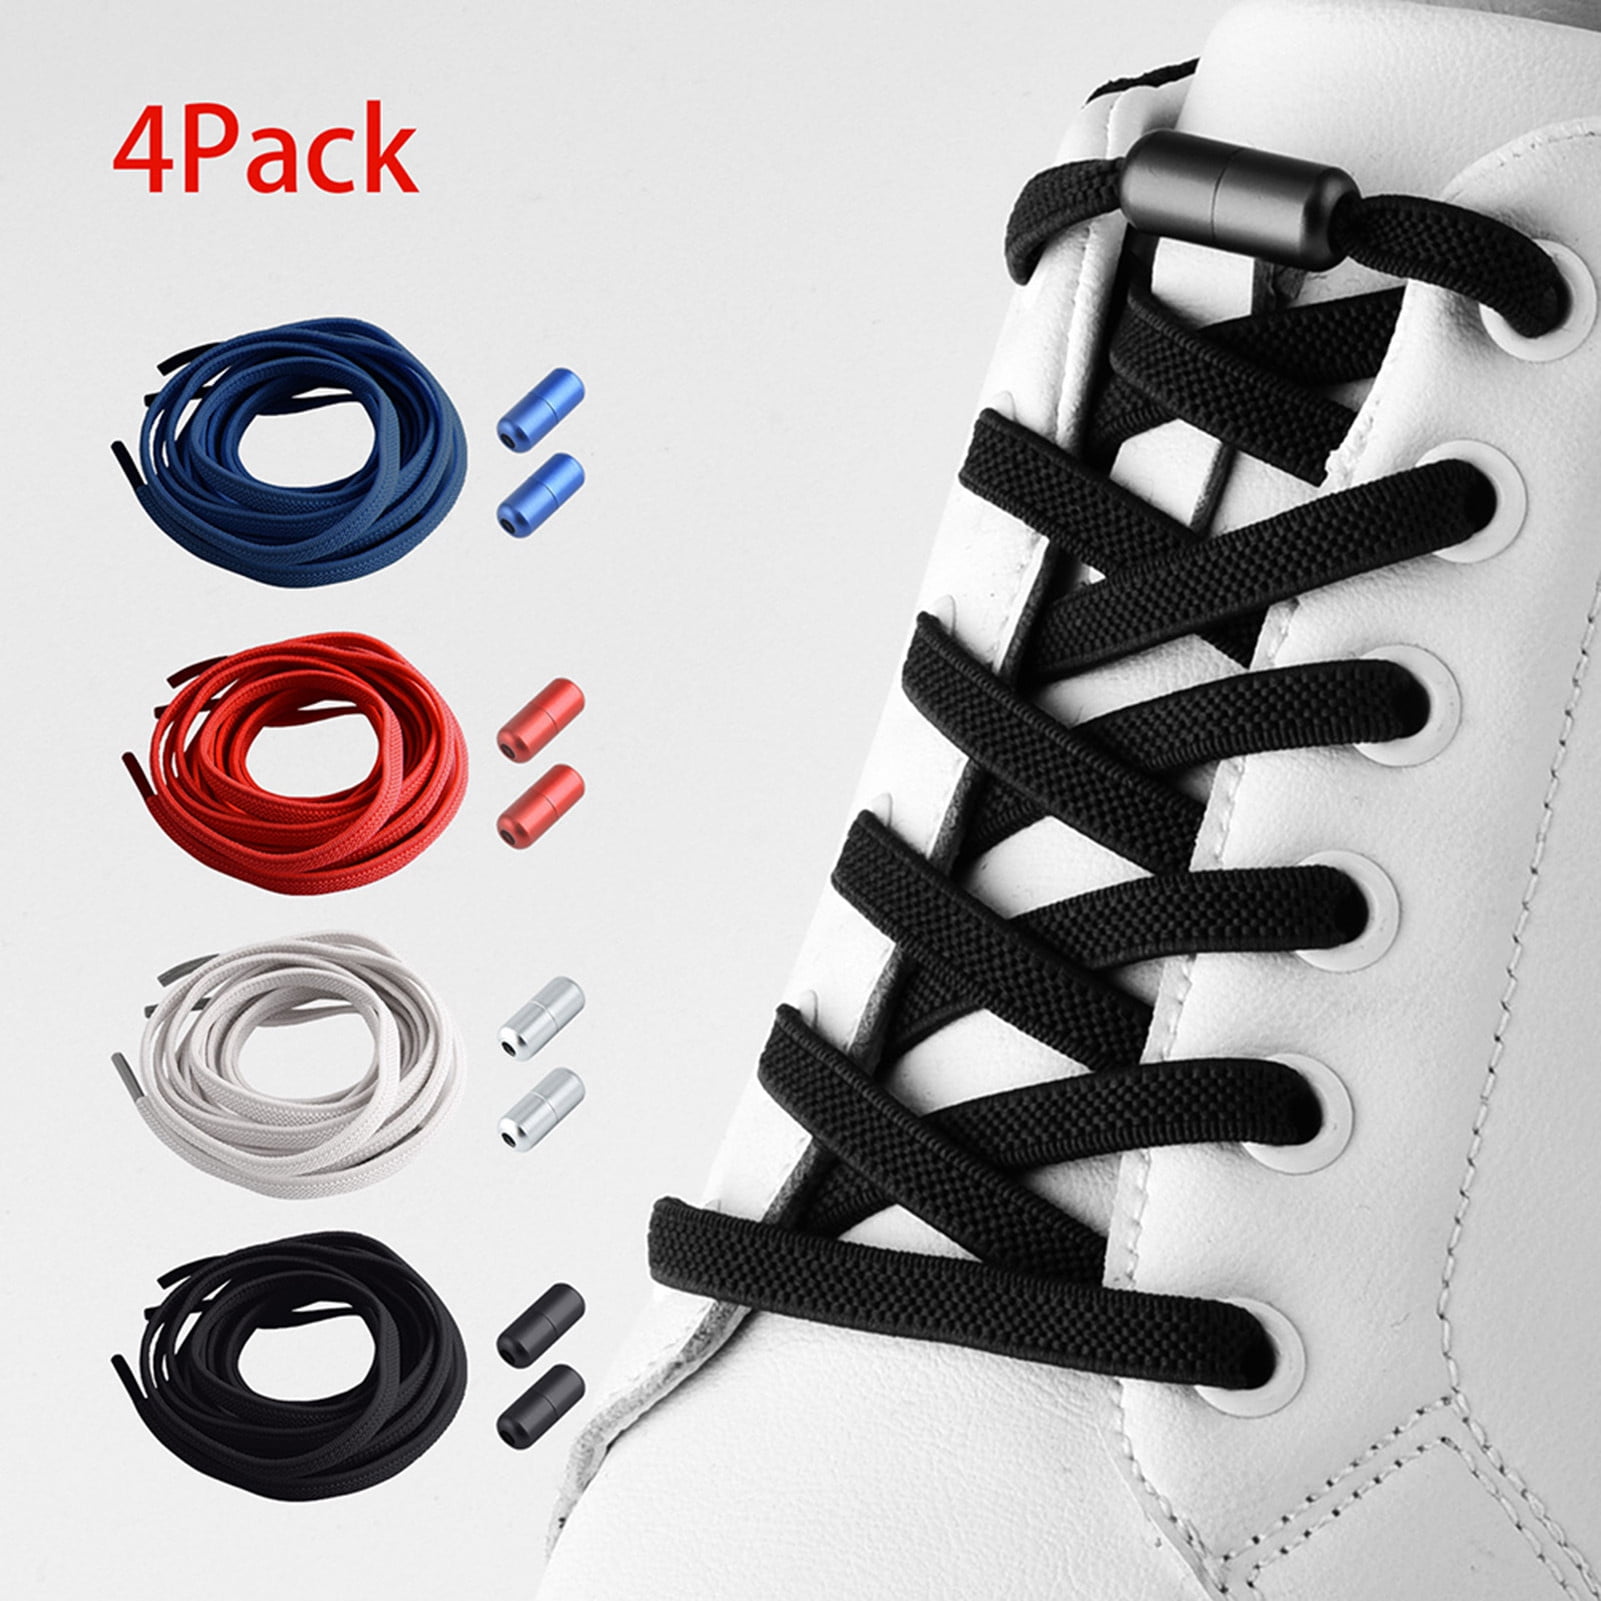 4 Pairs No Tie Shoelaces Elastic Lock Fast Lacing Lazy Lace Adult